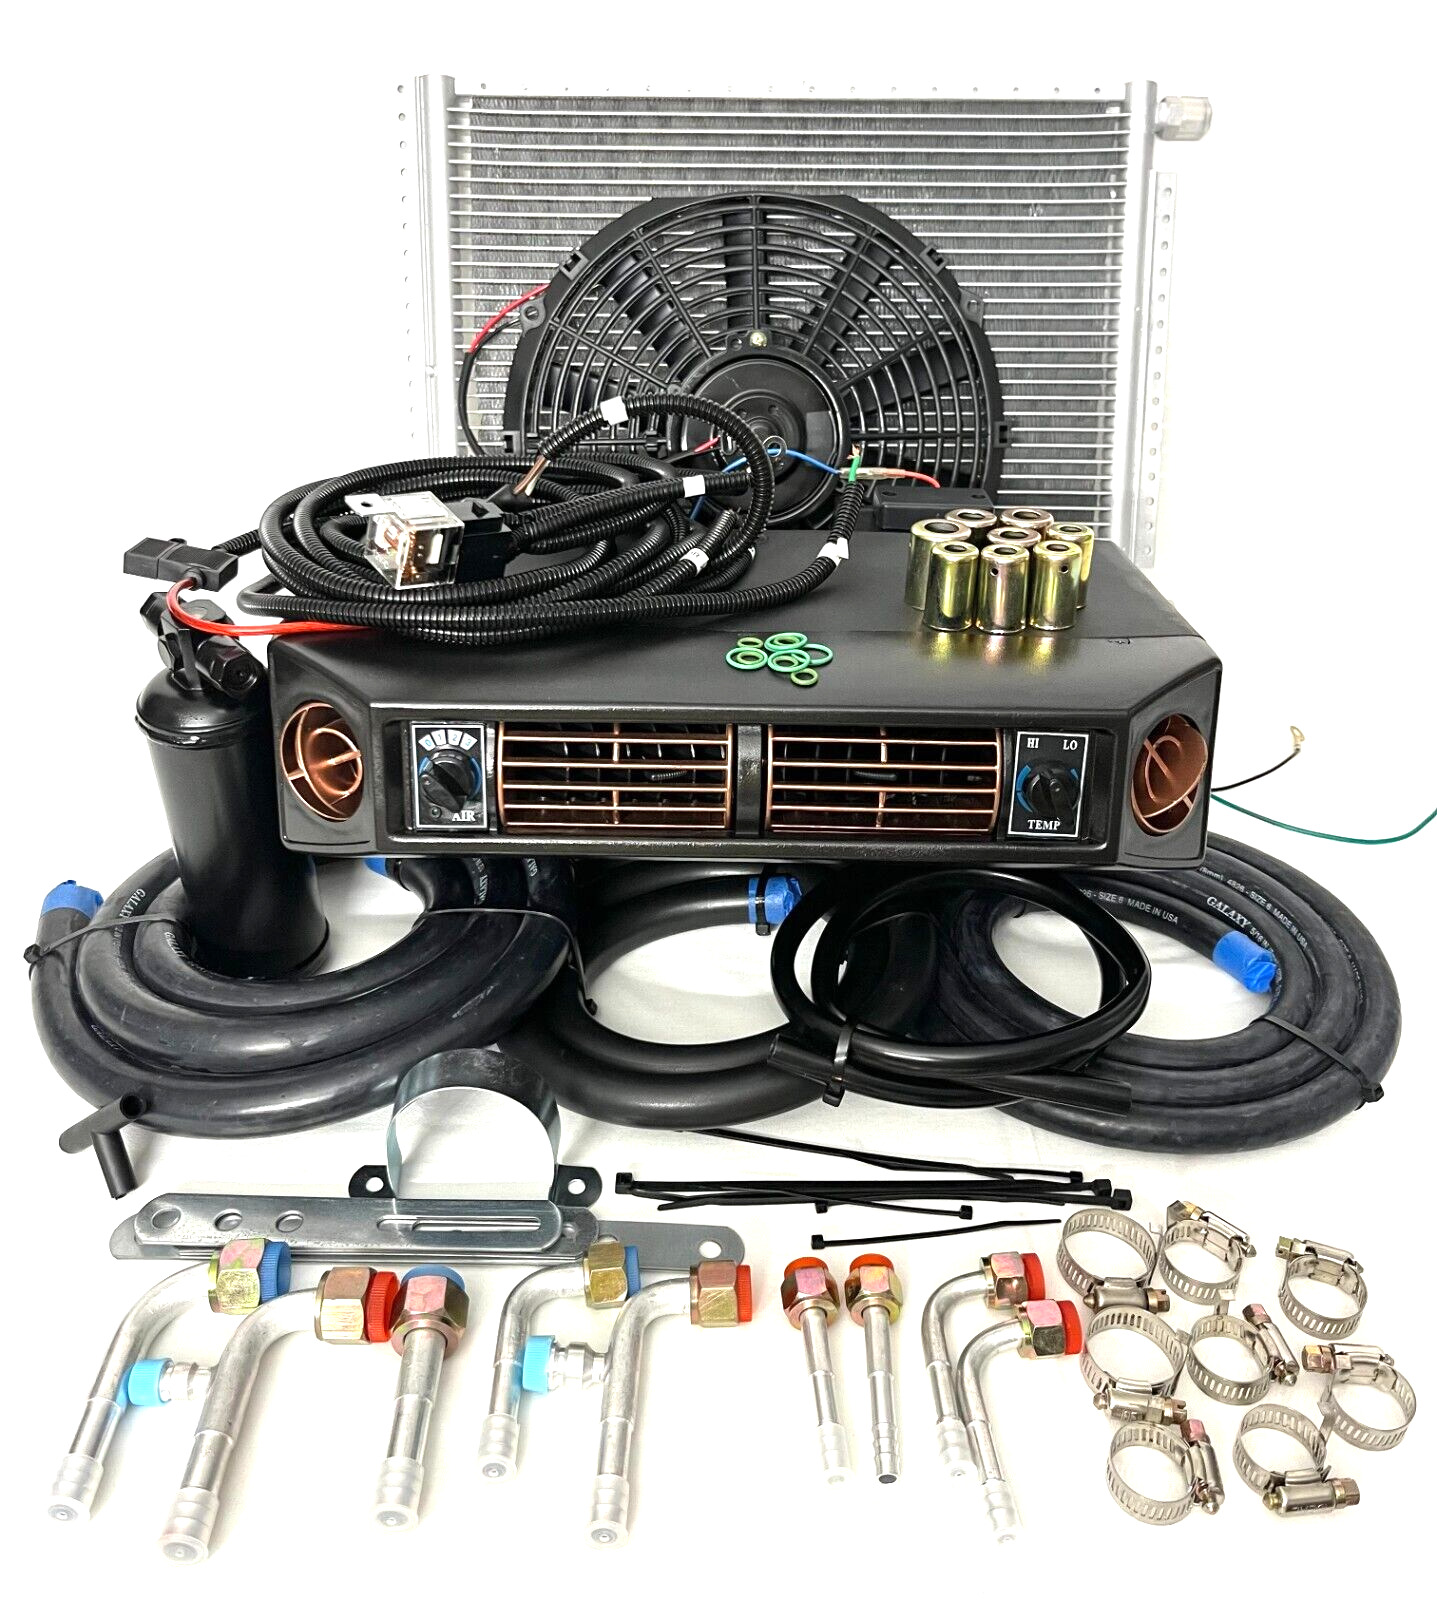 A/C KIT UNIVERSAL UNDERDASH EVAPORATOR 404-100 GOLD 12V WITH ELECTRICAL HARNESS